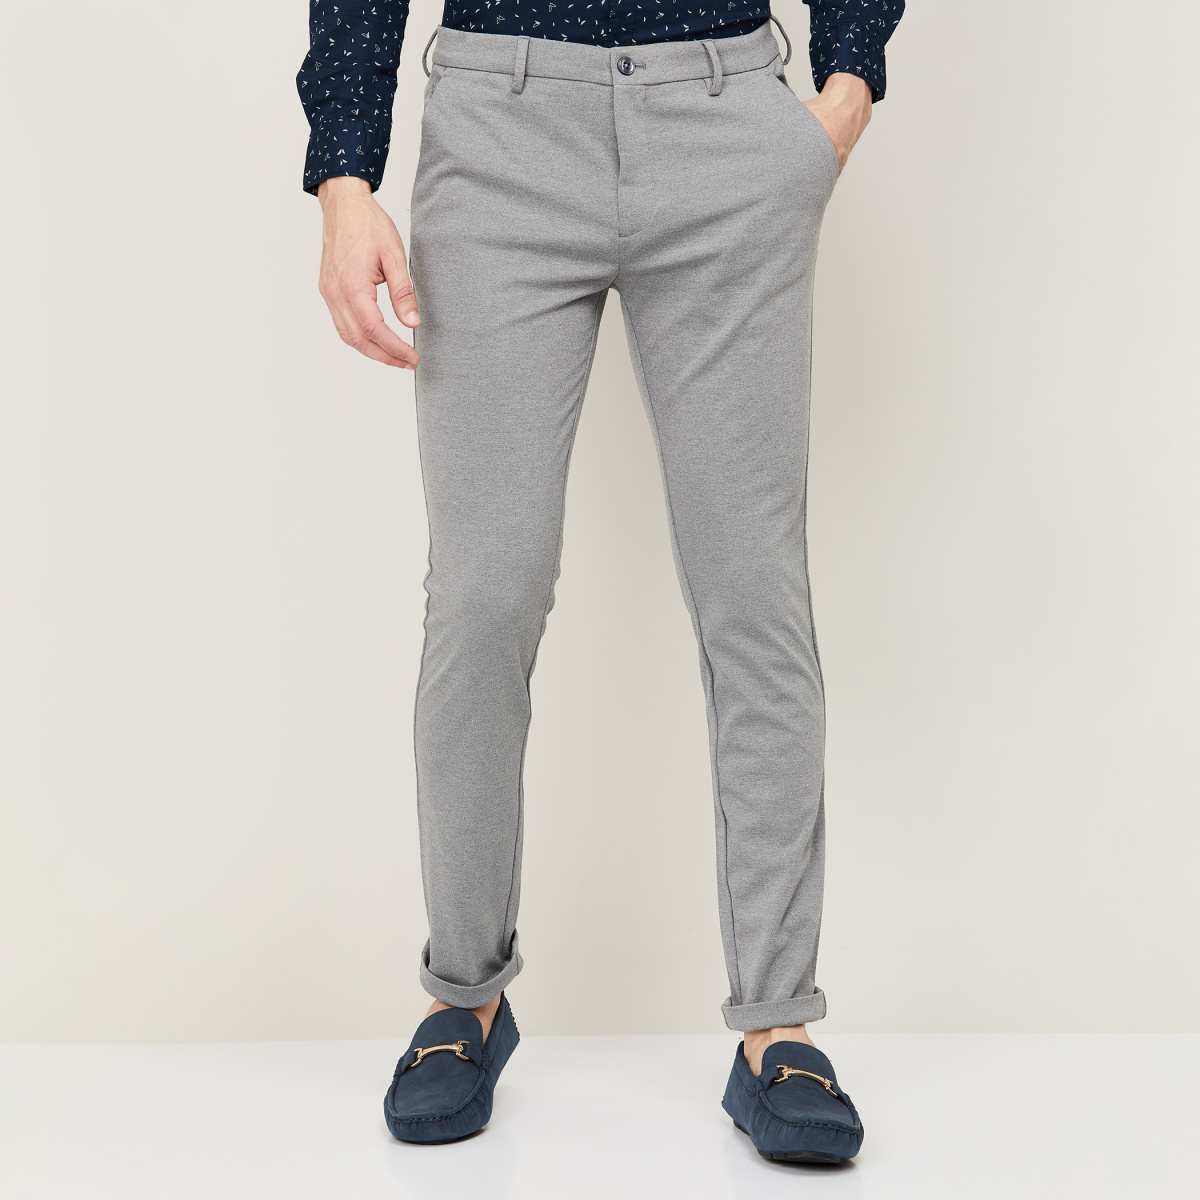 Benetton Slim Trousers outlet  1800 products on sale  FASHIOLAcouk